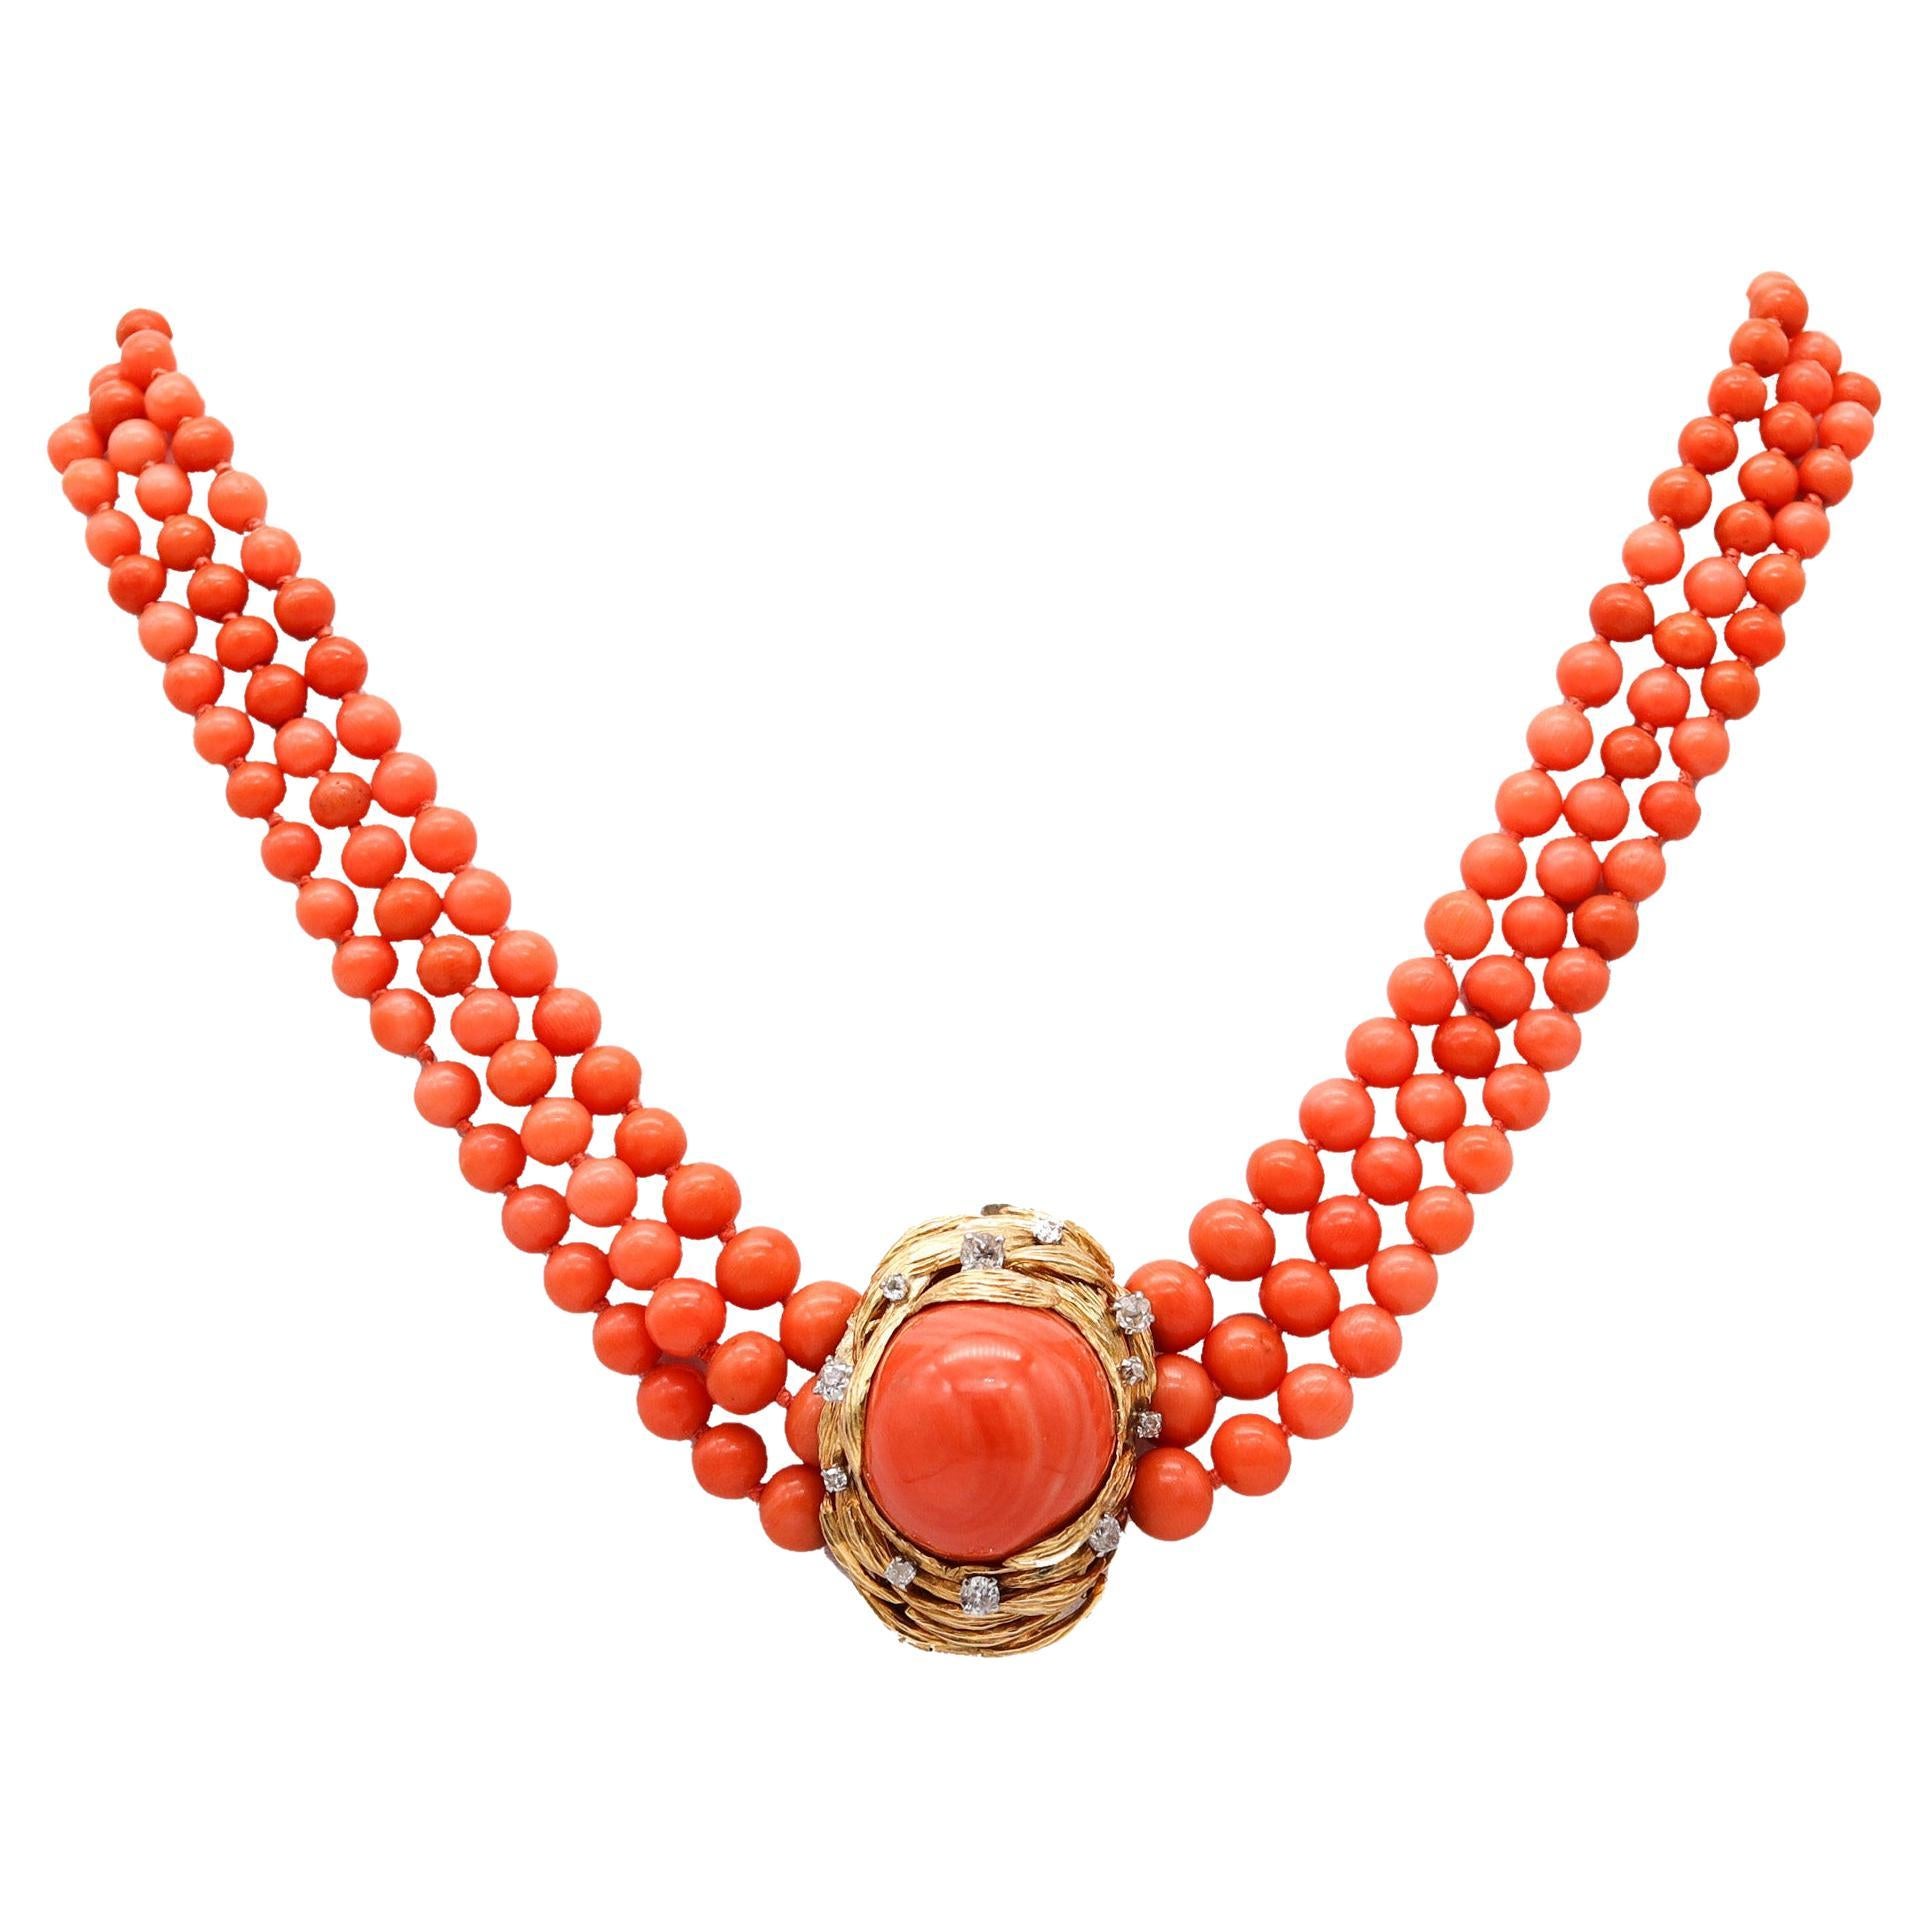 David Webb 1960 Graduated Coral Necklace In 18Kt Yellow Gold With Diamonds